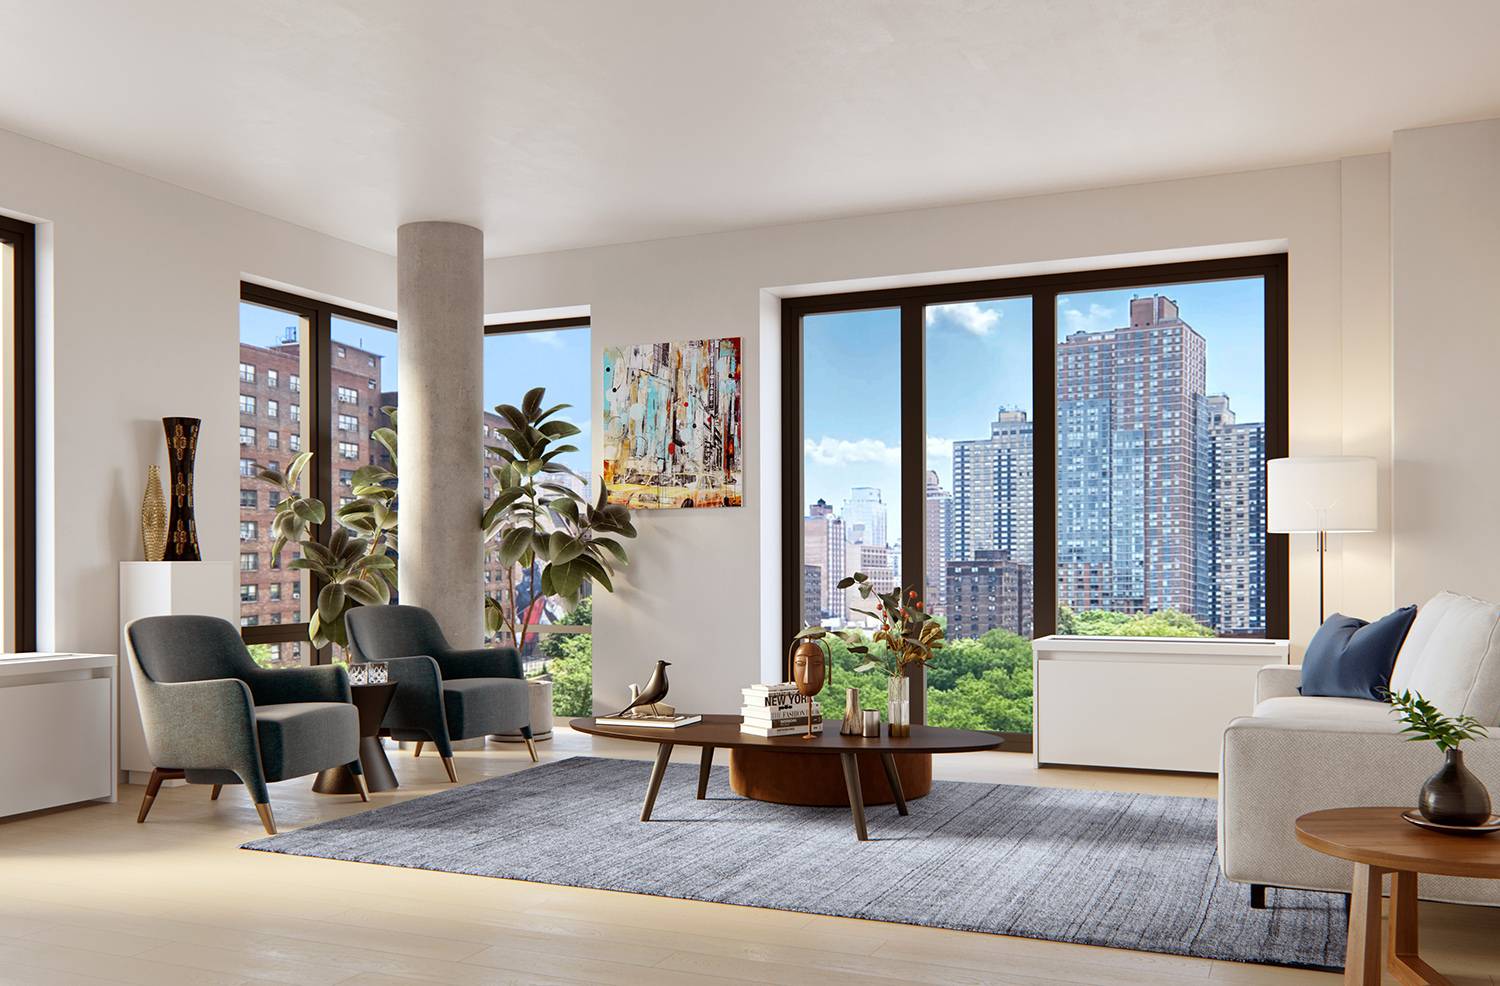 IMMEDIATE OCCUPANCY Move right into this stunning 1 bedroom, 1 bathroom home plus home office and enjoy a contemporary lifestyle at East Harlem's newest development.